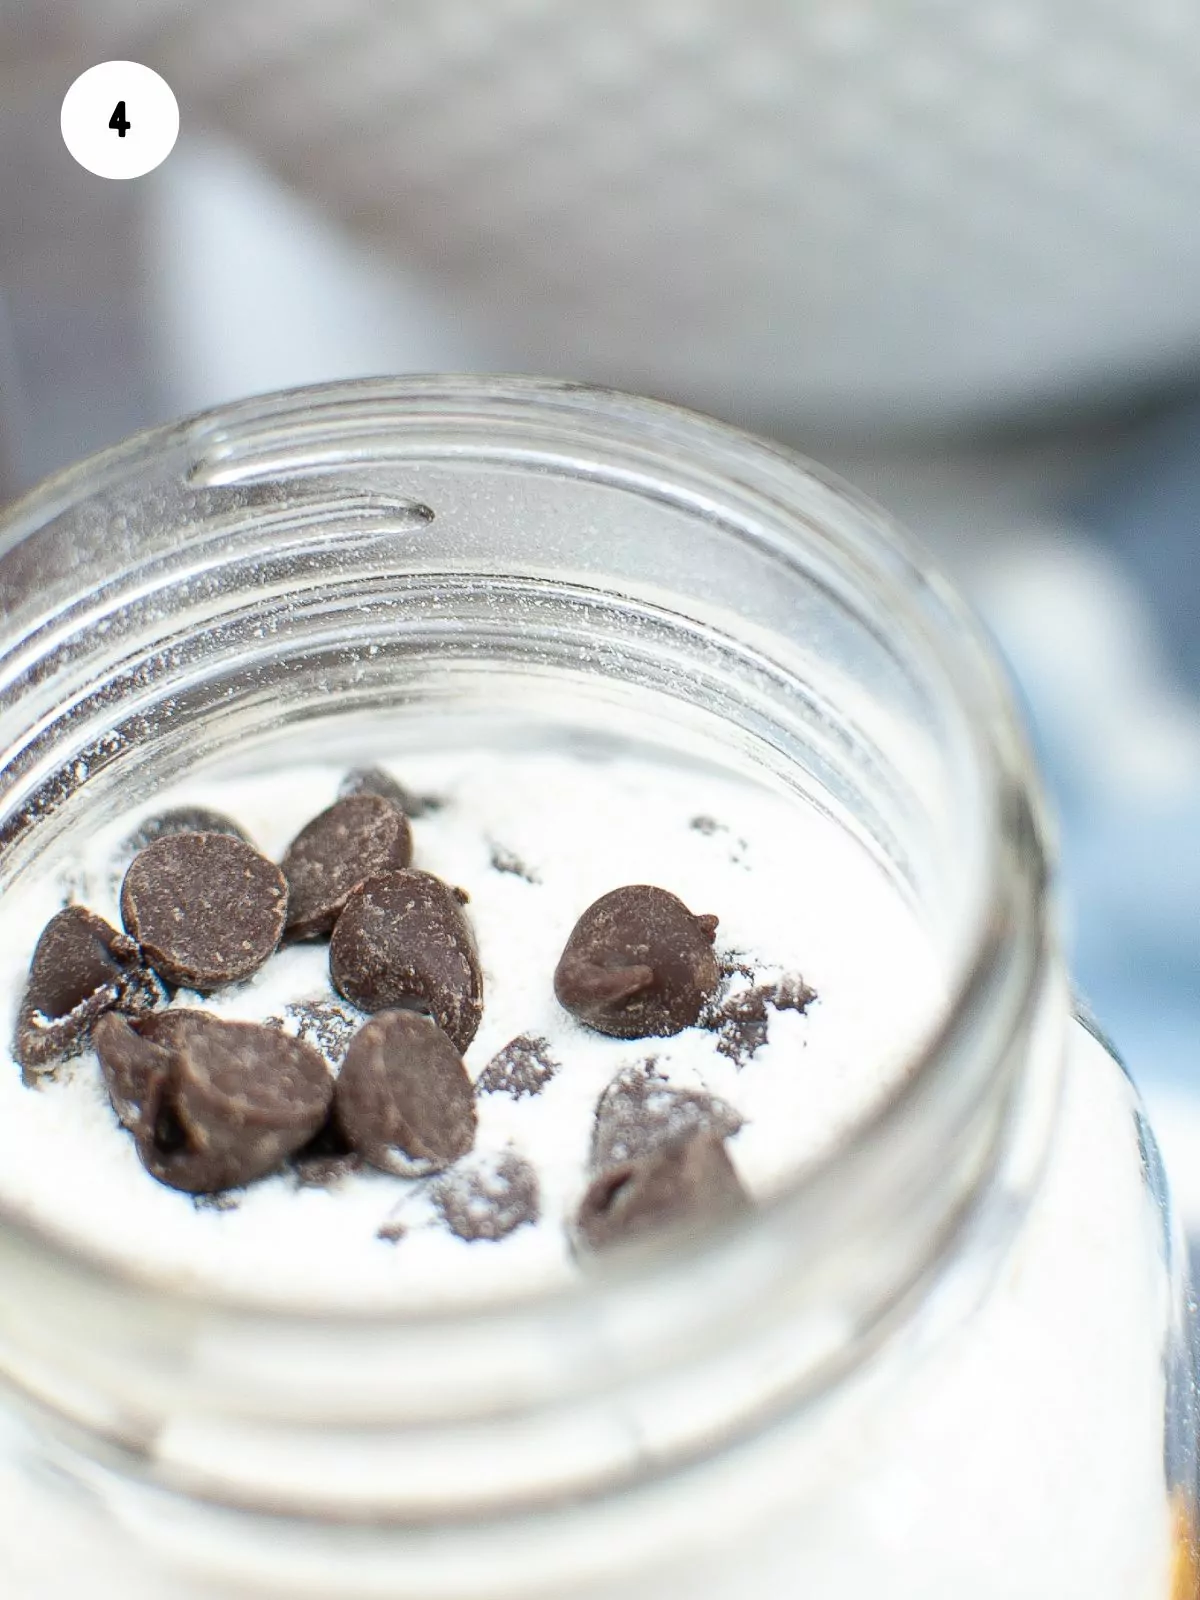 Top filled jar with more chocolate chips